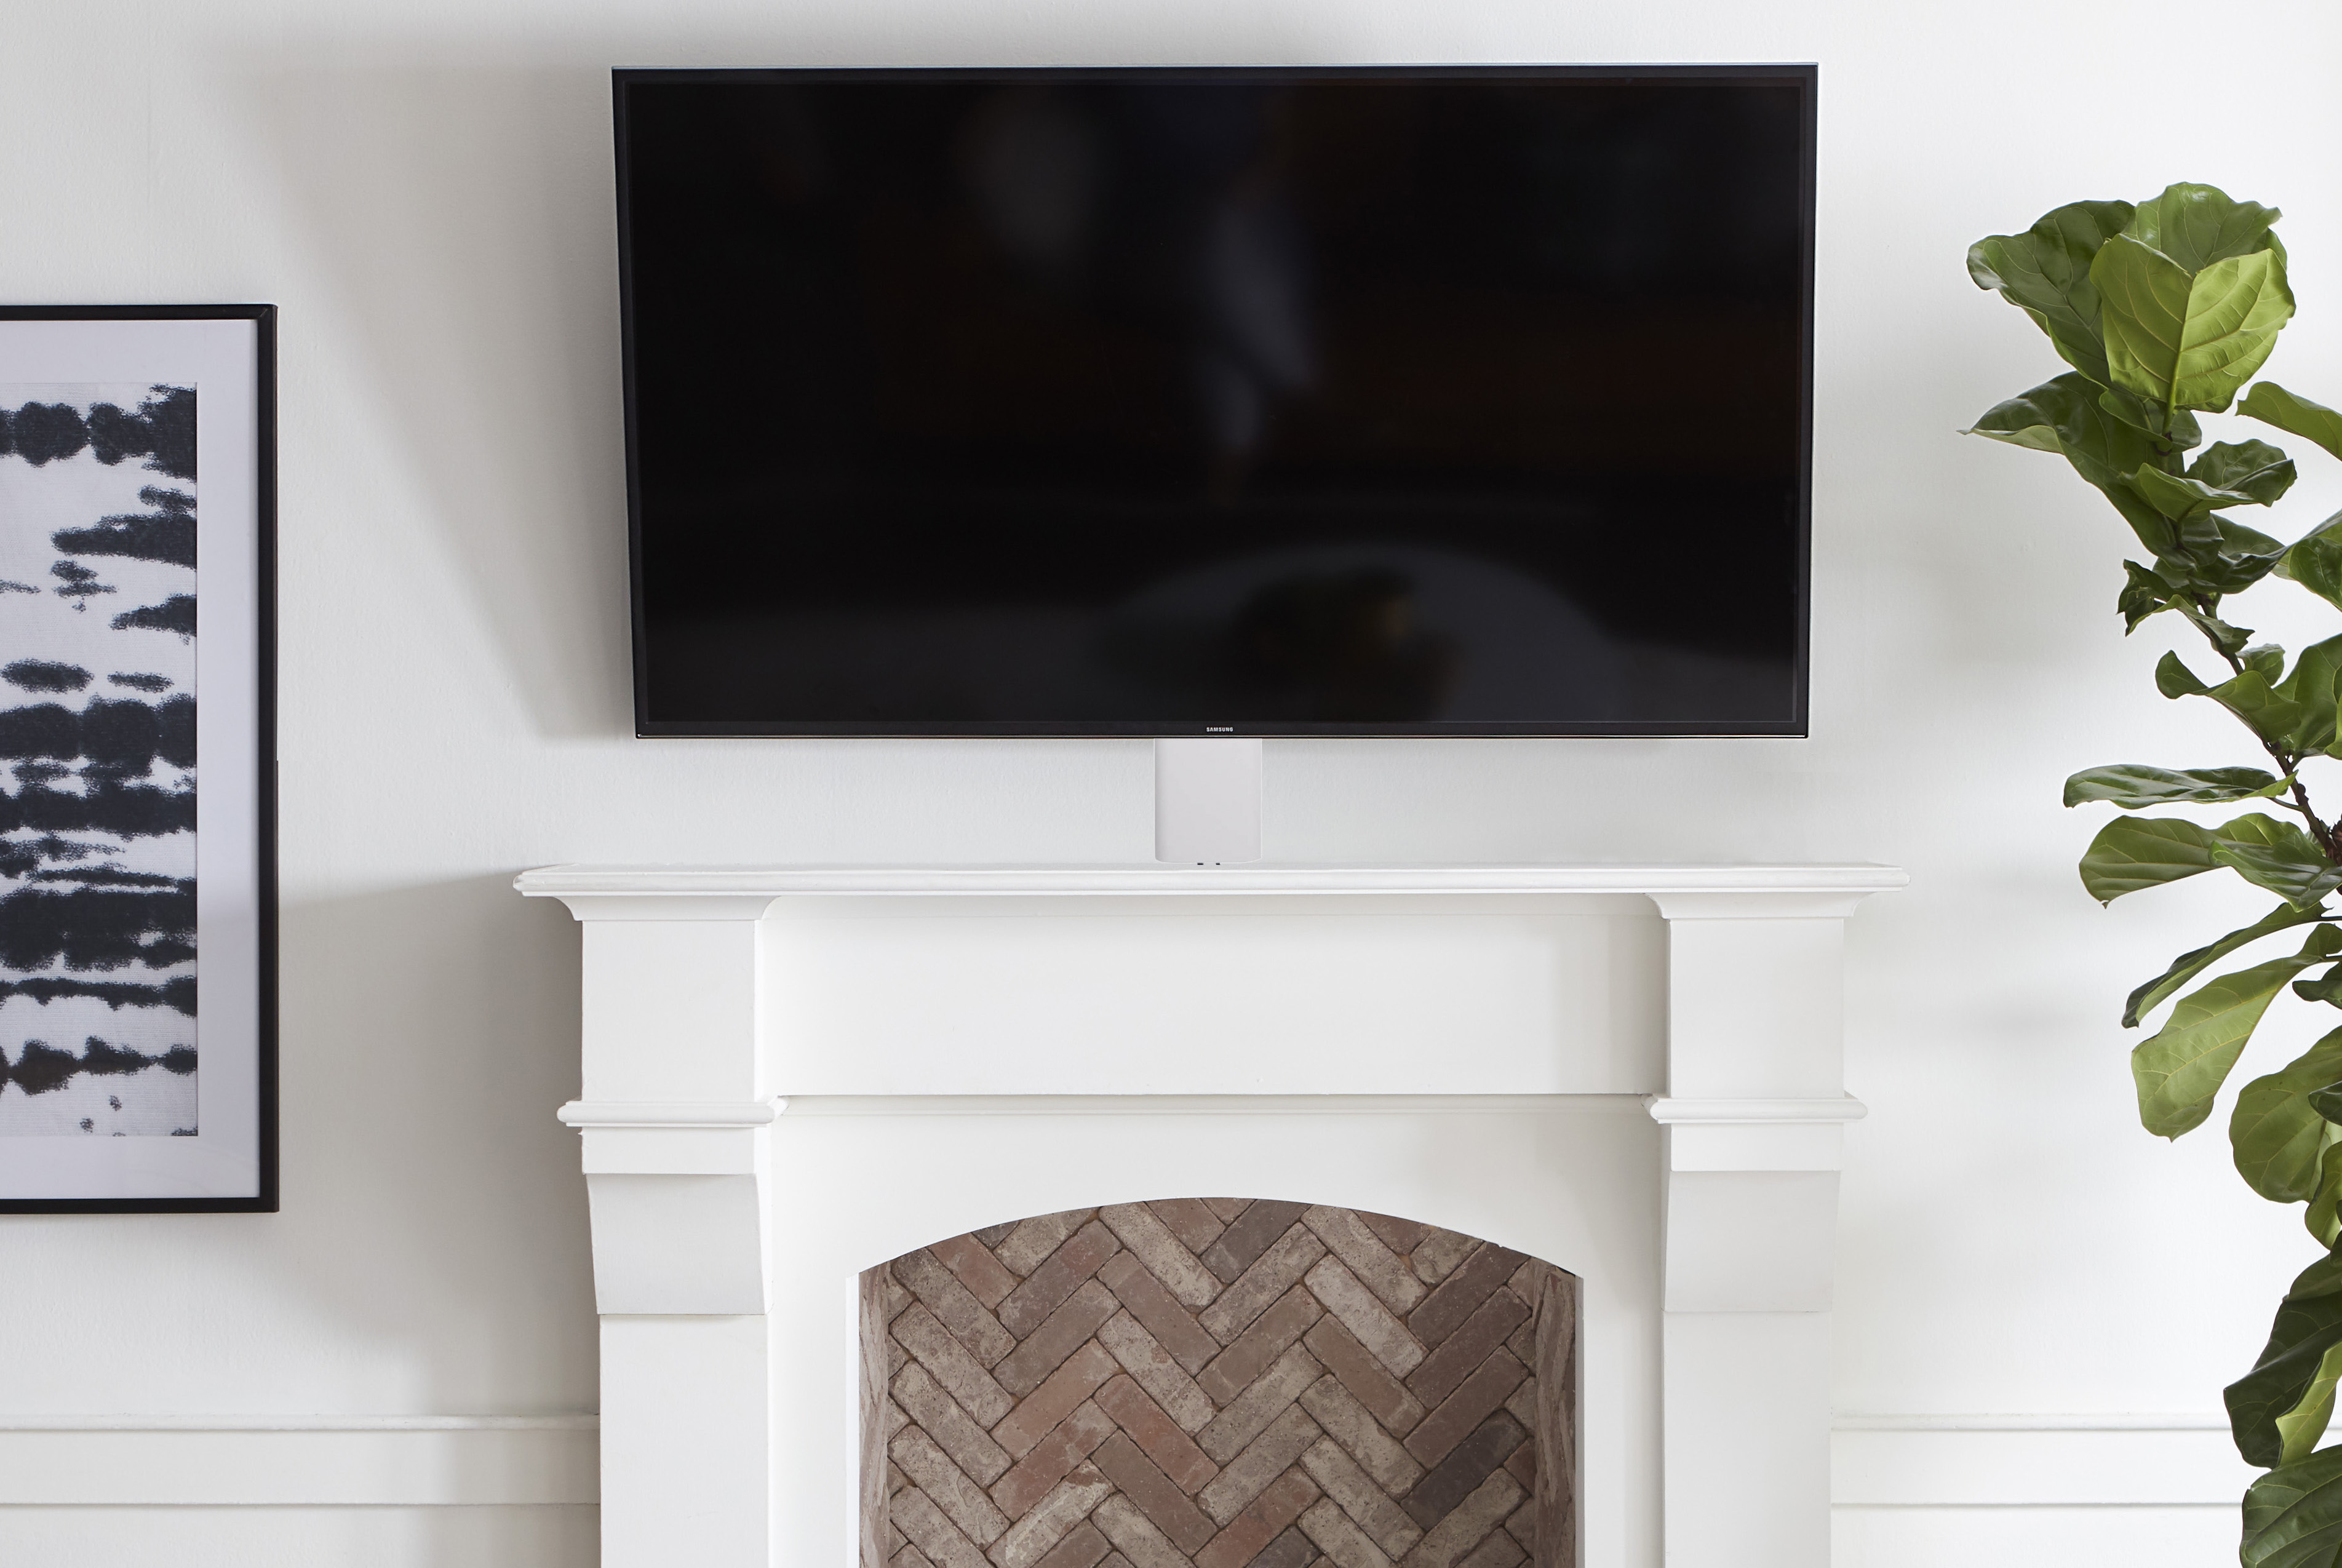 cablecover mantel embed.jpeg?t=1551985023& ga=2.188806187.1093847440.1551710585 490991834